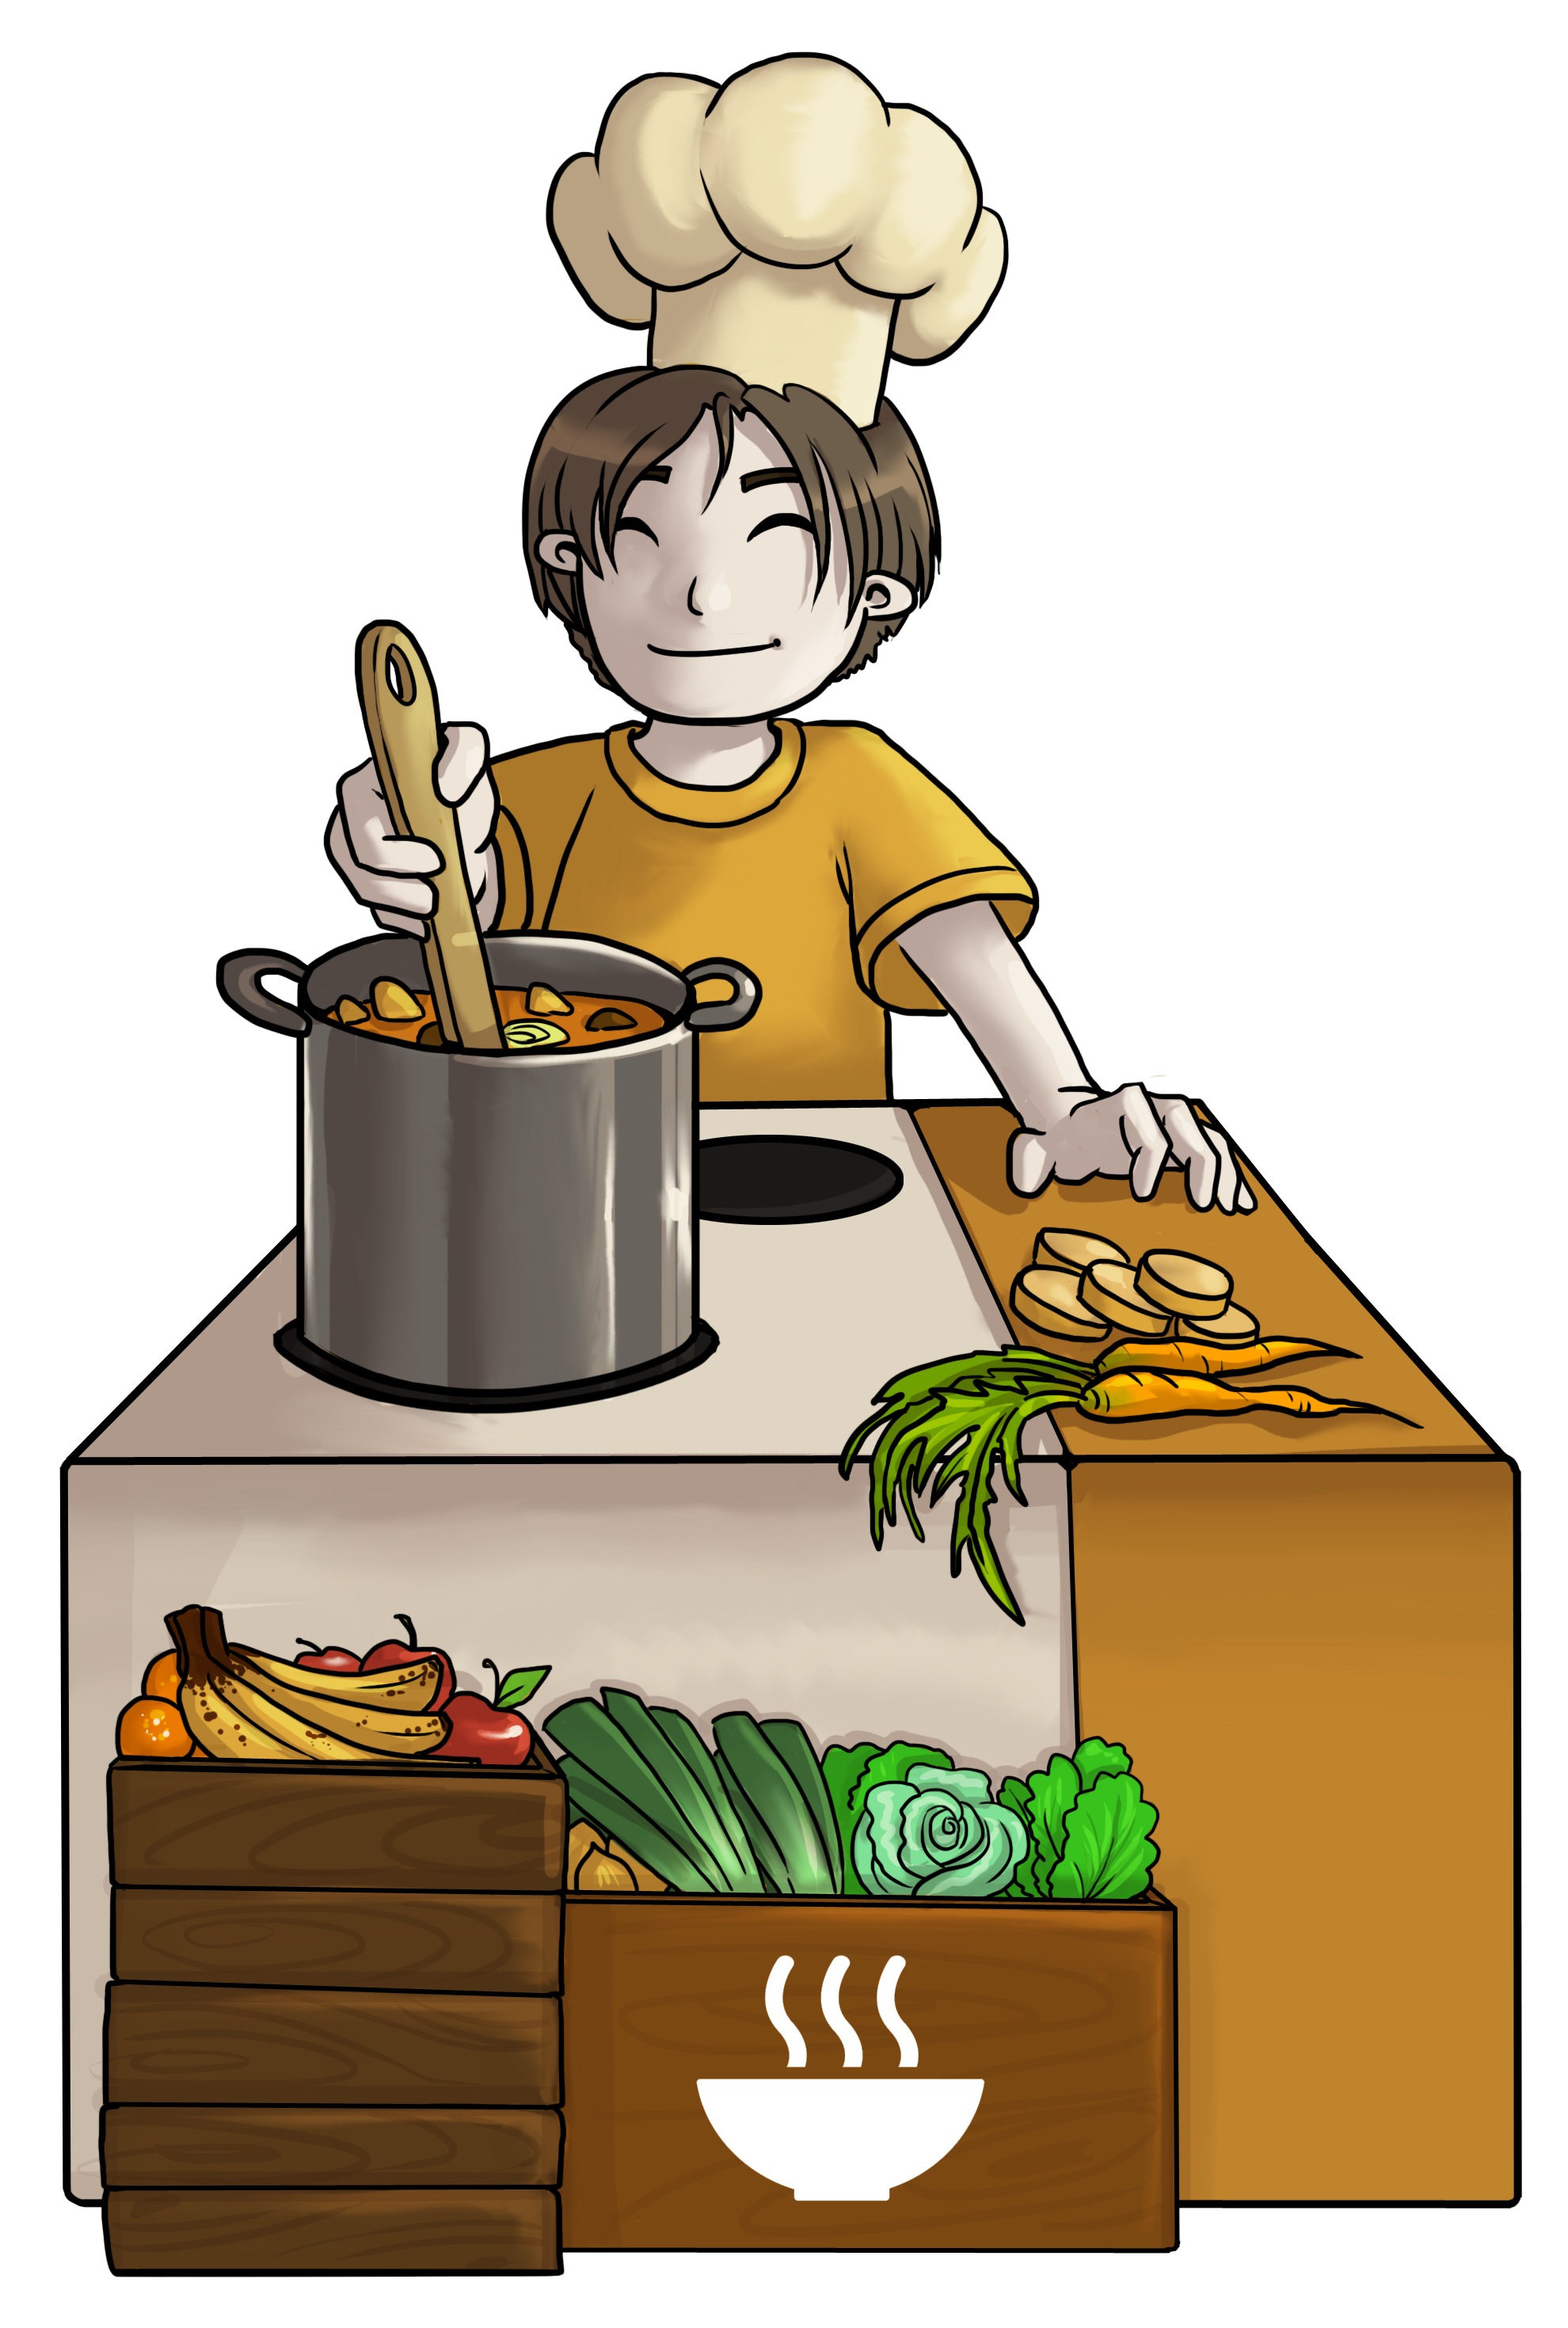 Illustration. A child is cooking by a stove.